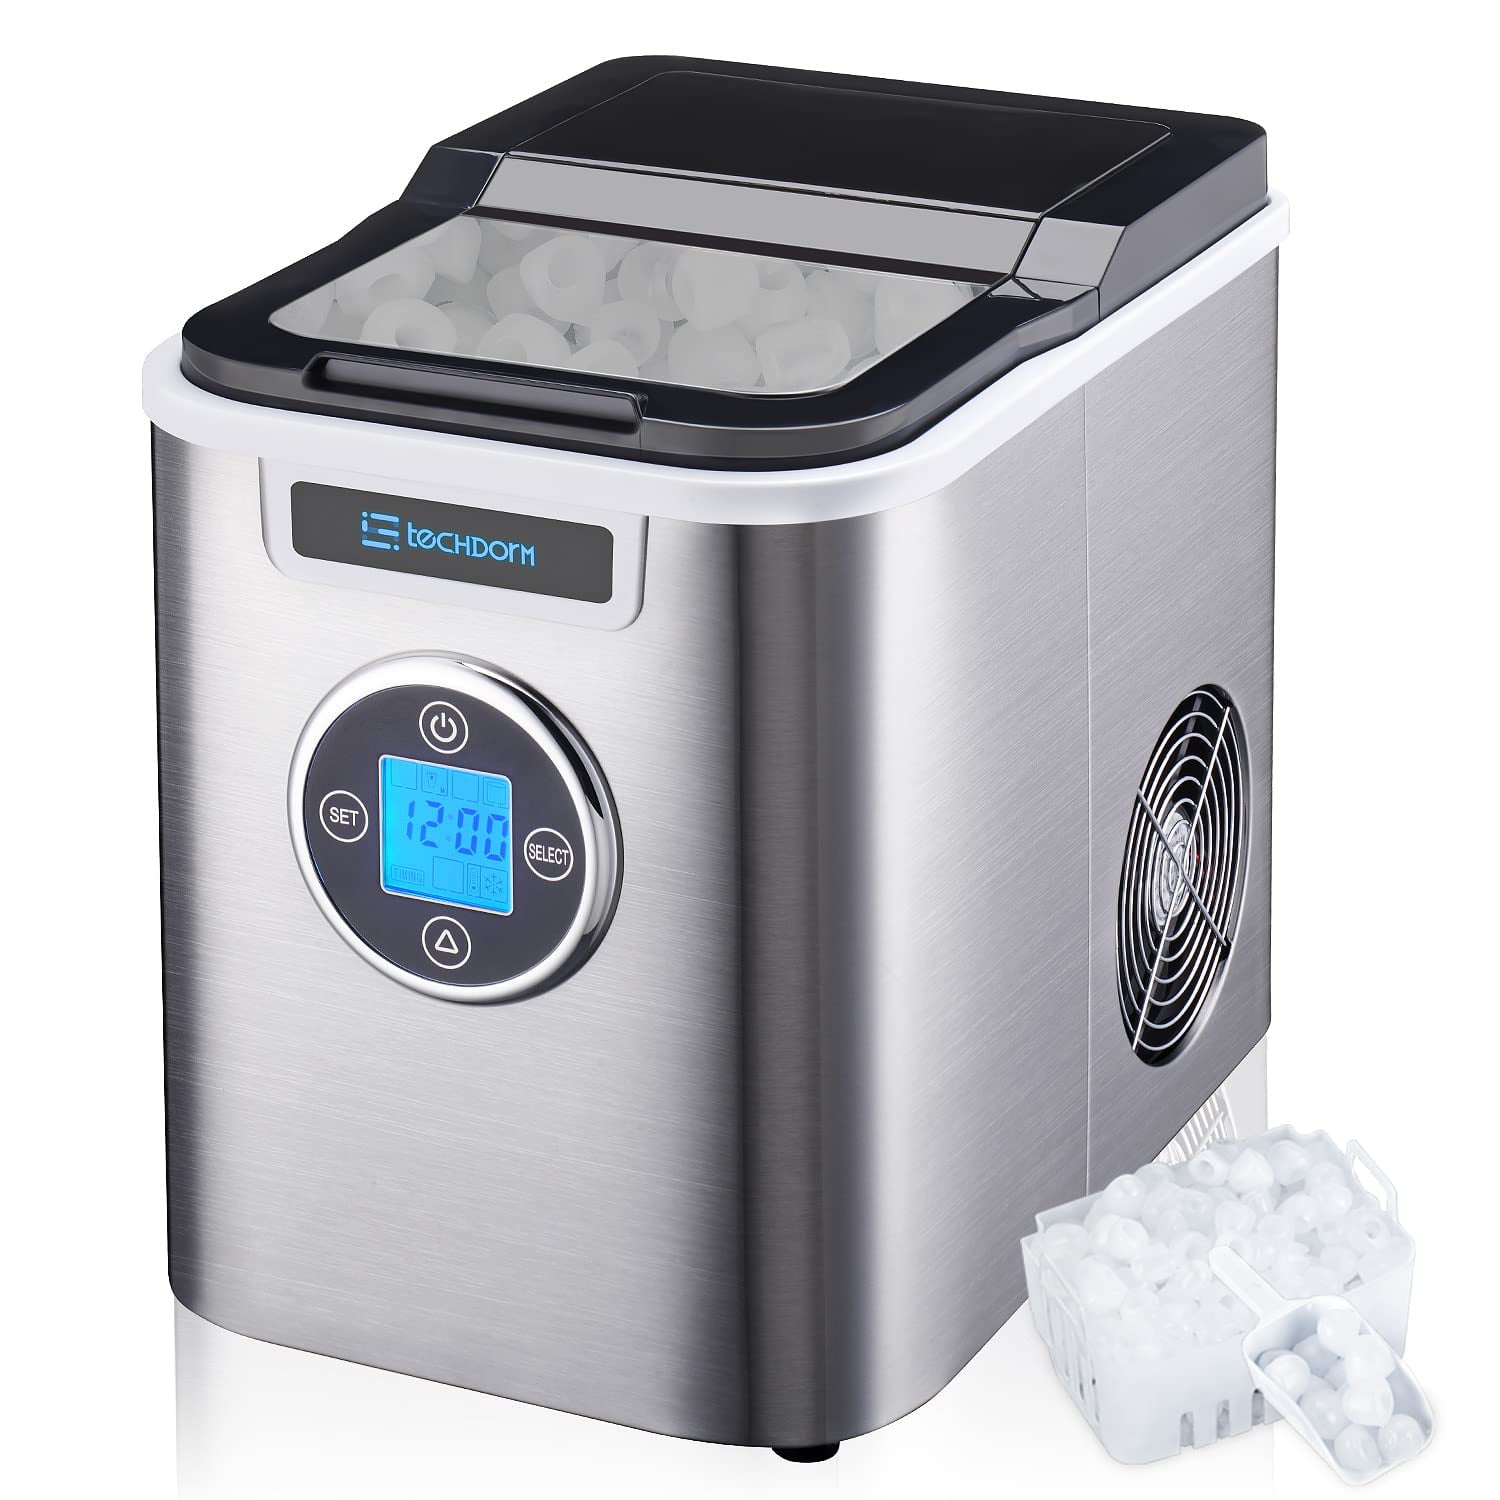  Upstreman Y90 Countertop Ice Maker, Self-Cleaning Ice Cube  Maker Machine, Max 26Lbs/Day, 9 Ice Cubes Ready in 6 Mins, Portable Bullet Ice  Maker for Home, Kitchen, Office, Party : Appliances